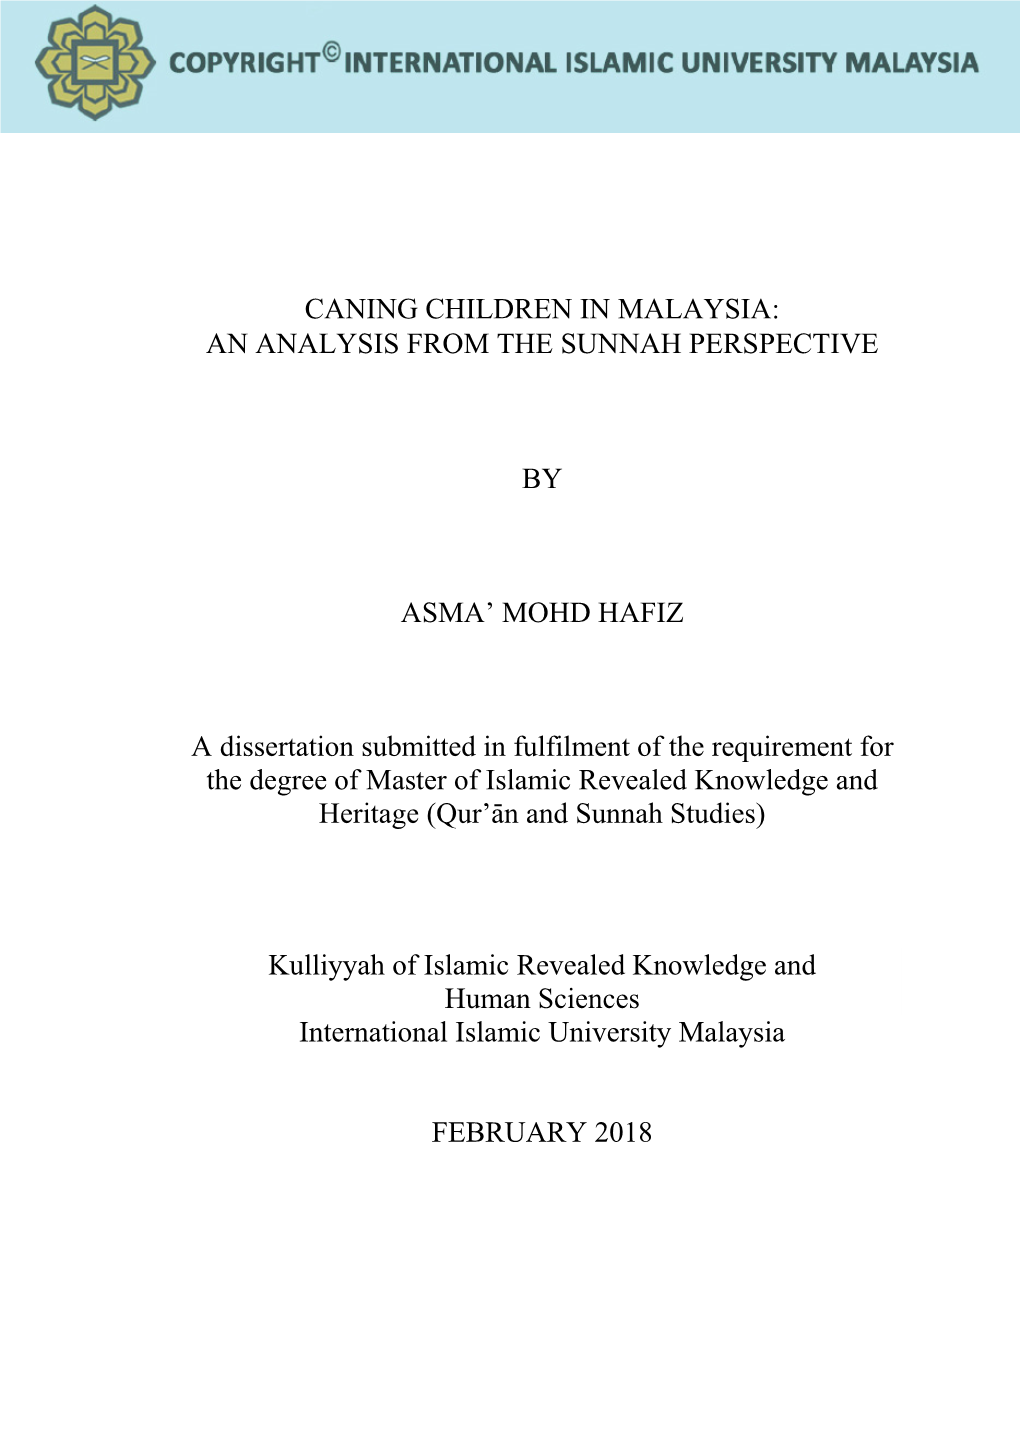 Caning Children in Malaysia: an Analysis from the Sunnah Perspective